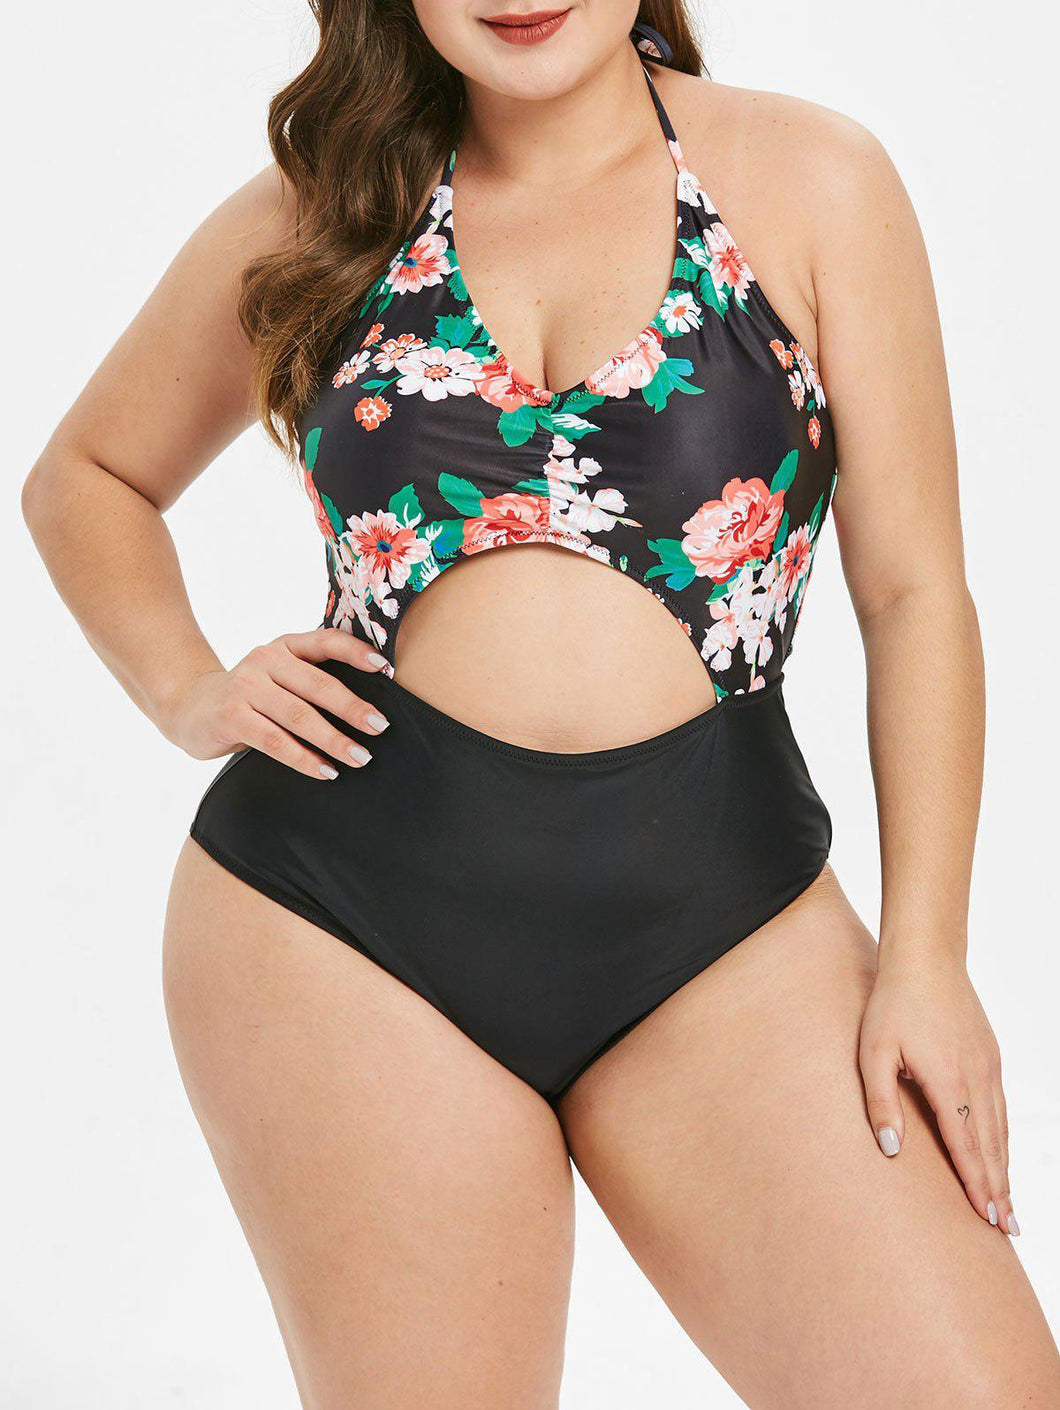 Rosegal plus swimsuit black and floral with peekaboo